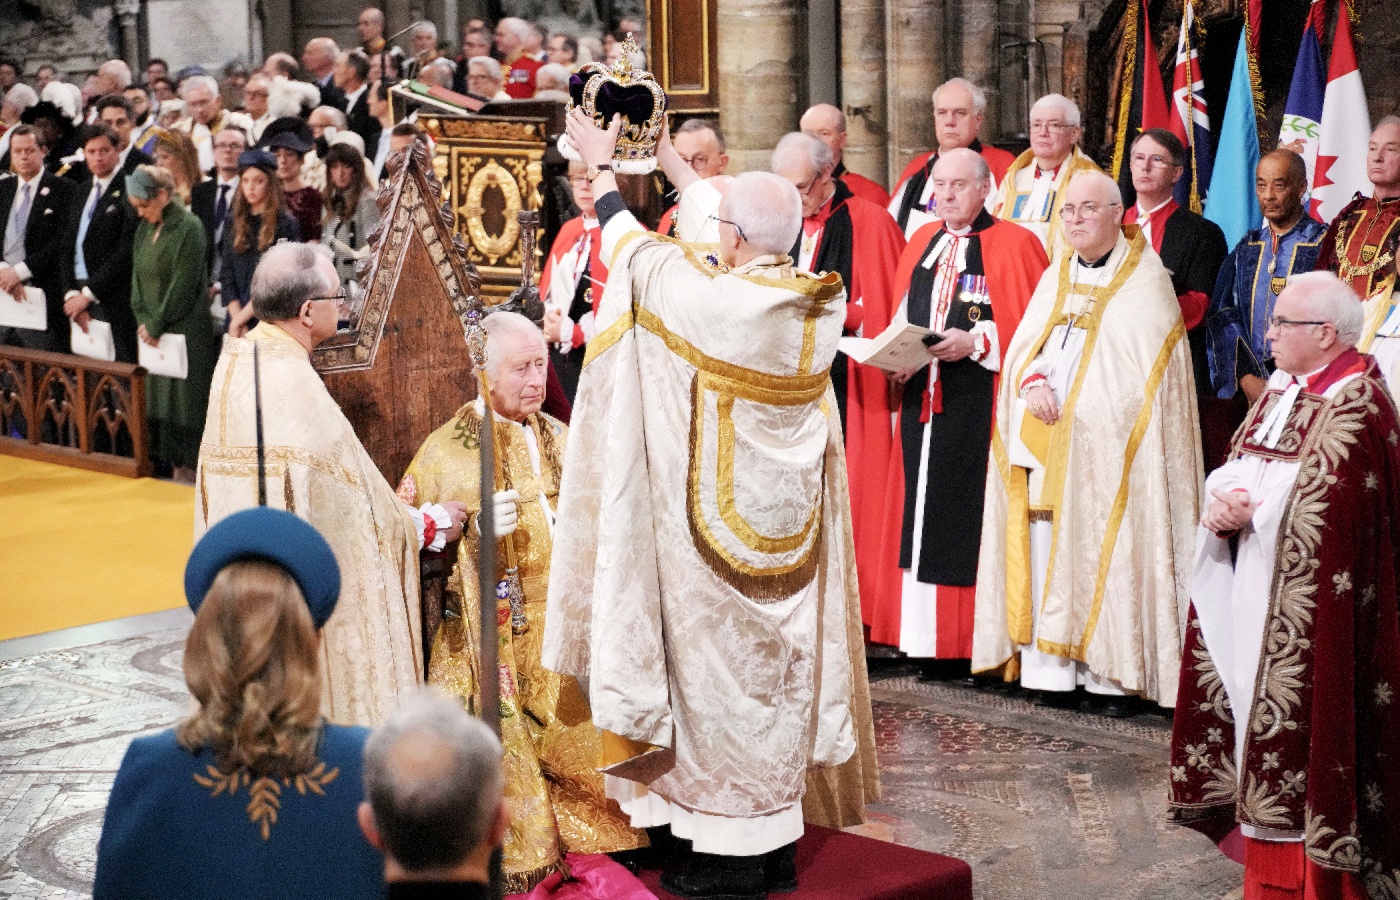 King Charles III is crowned with St Edward's Crown by The Archbishop of Canterbury the Most Reverend Justin Welby during his coronation ceremony in Westminster Abbey.